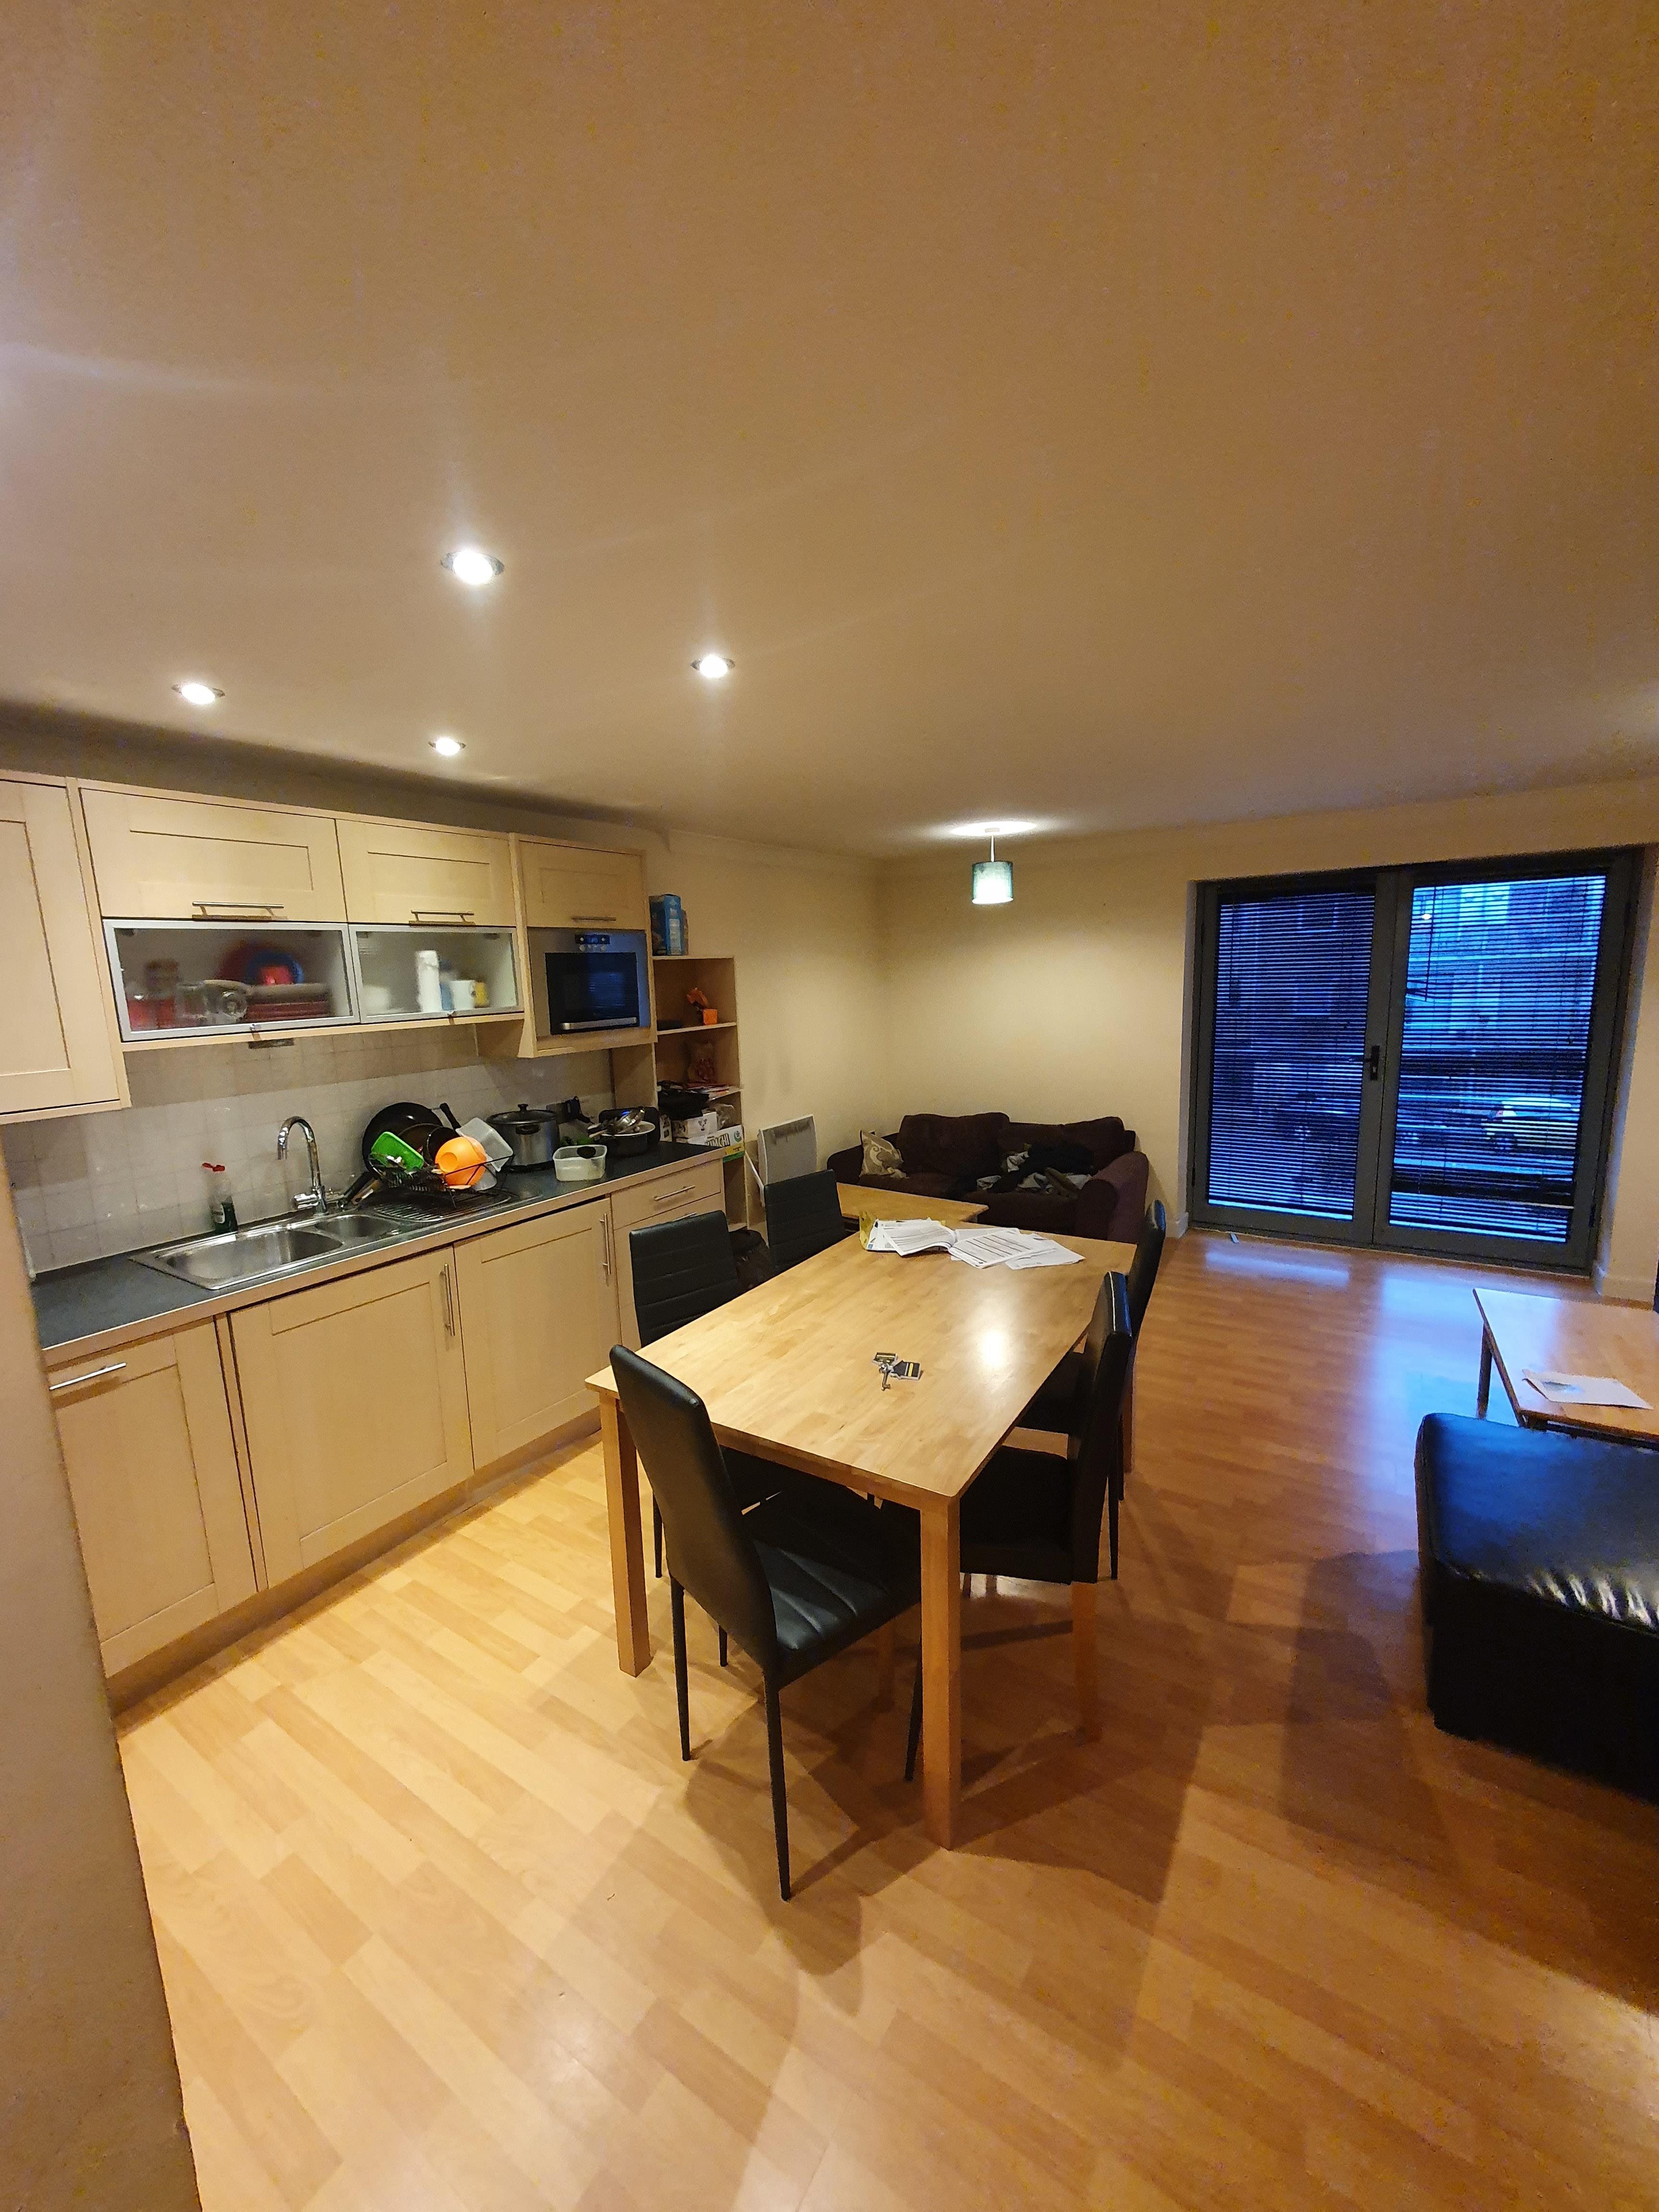 3 bed flat to rent in Lightship Way, Colchester - Property Image 1